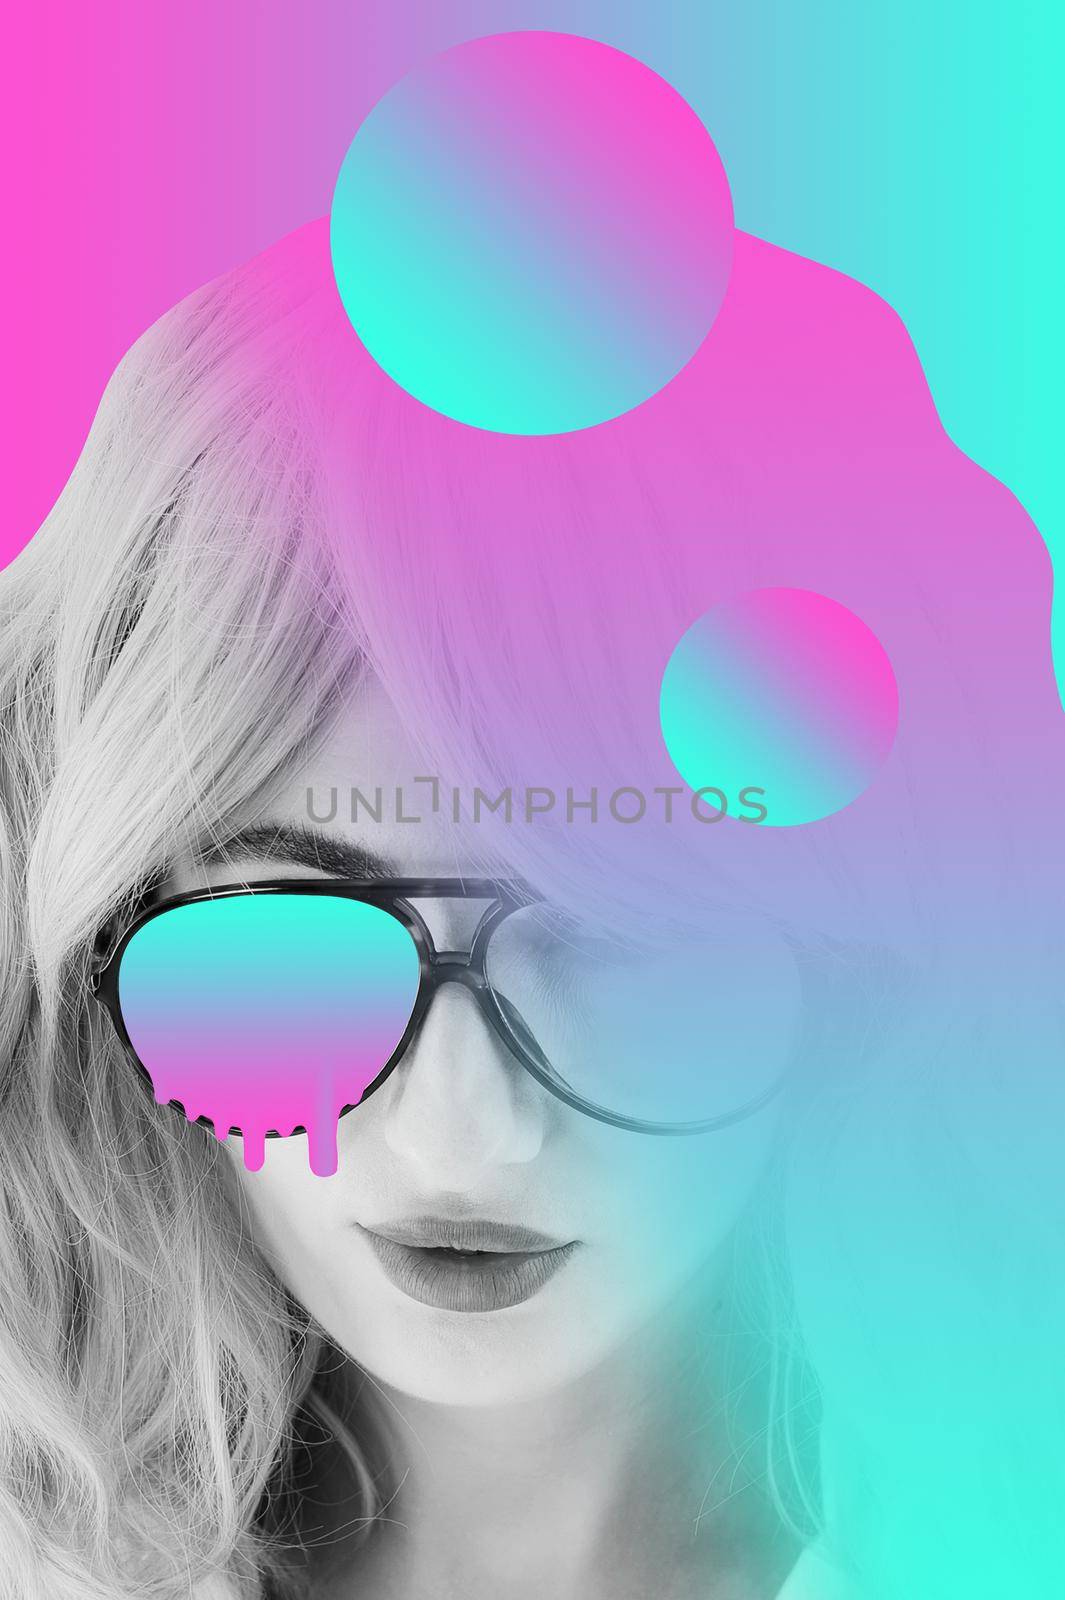 Funky woman in sunglasses. Crazy lady and surreal composition of textures, shapes, gradients. Contemporary art collage. Fashion magazine style for posters, banners, wallpaper. Zine culture. Pop art.